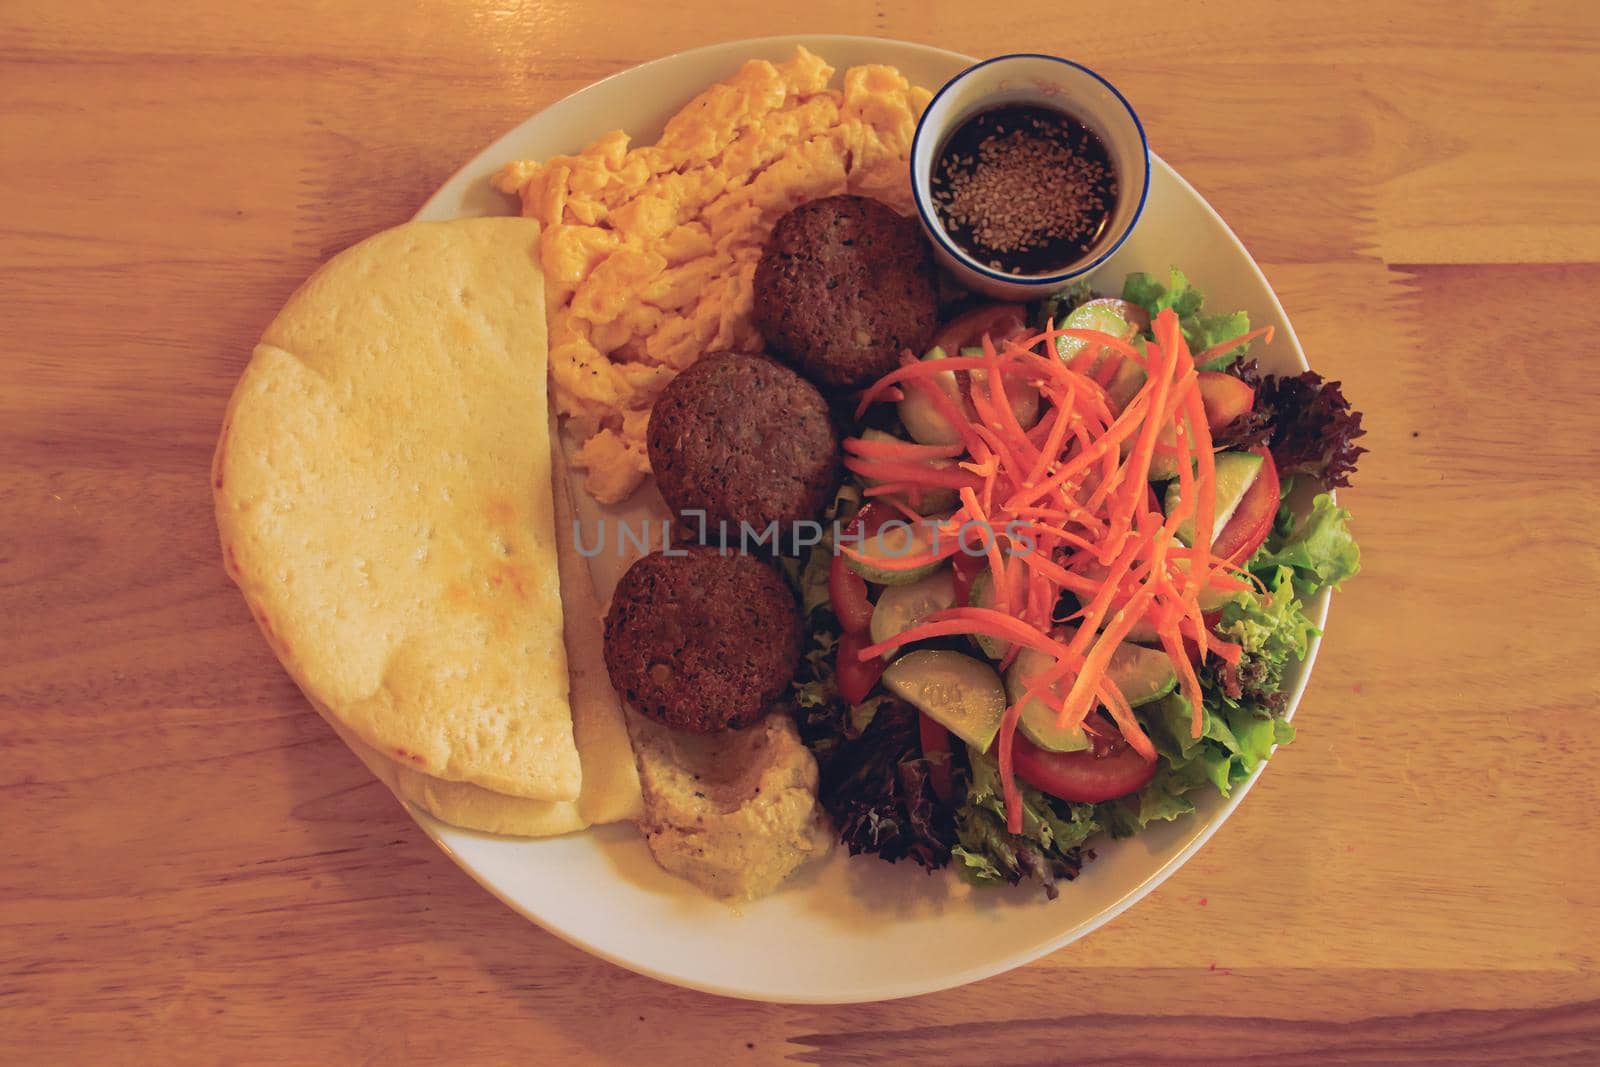 A plate full of falafel balls, pita bread, scrambled eggs and raw vegetable salad for a healthy high protein ovo-vegetarian ketogenic breakfast